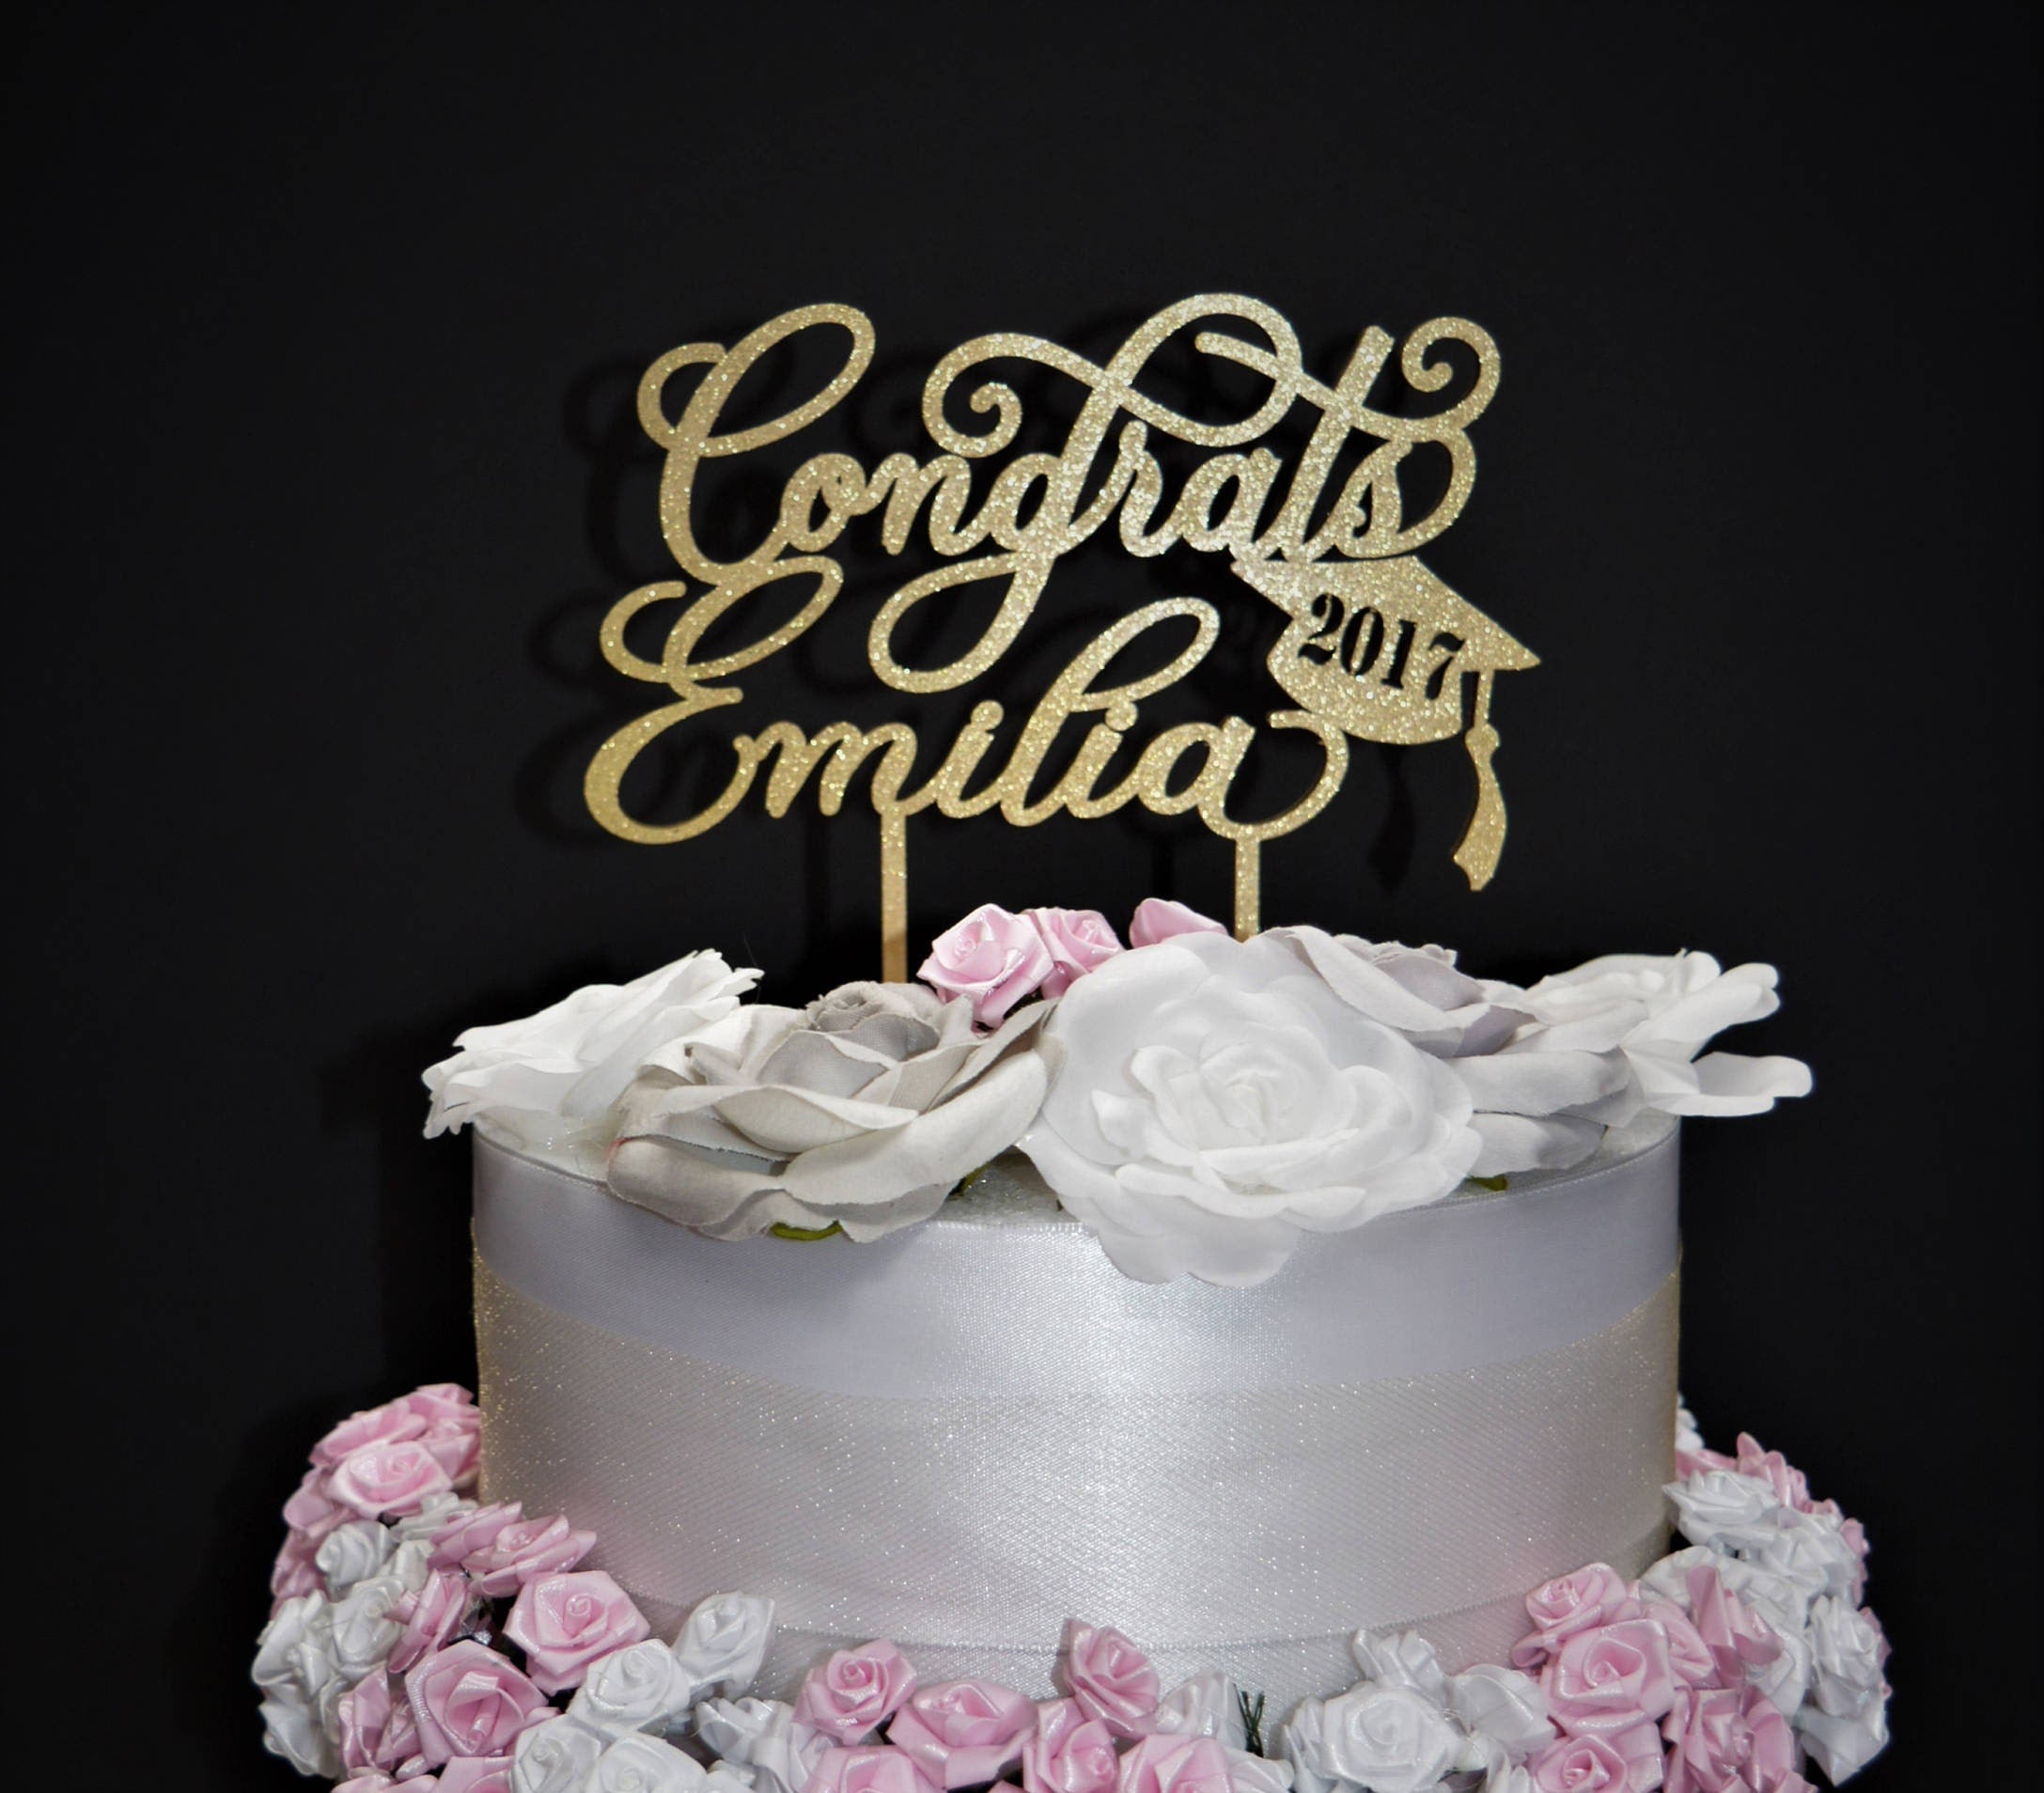 Buy Personalised Congratulations Cake Topper Online in India - Etsy